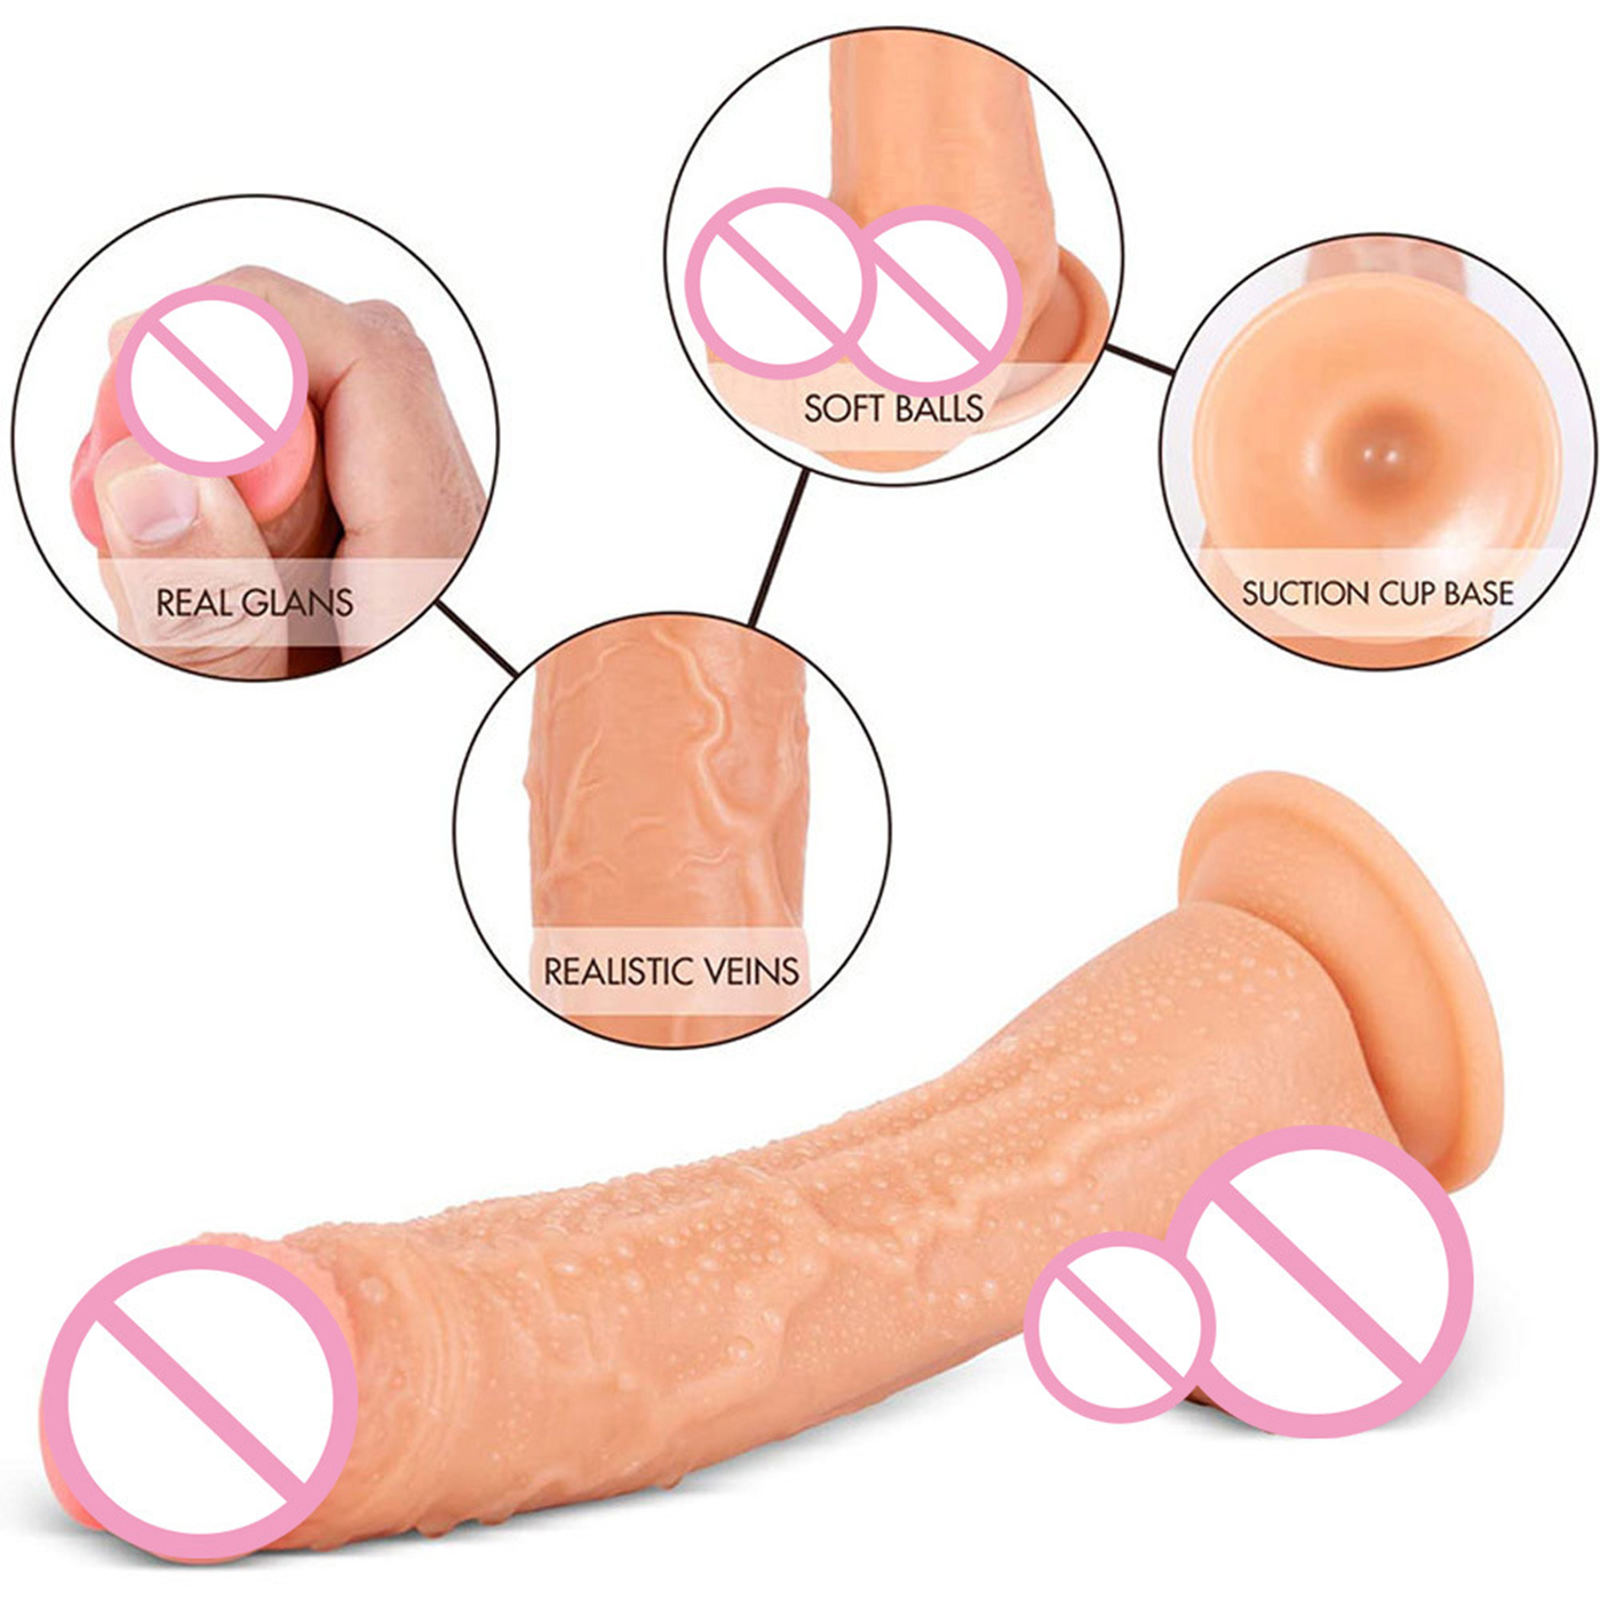 Wholesale Silicone Dildos Penis Fake Penis Manual Dildo Vibrators Masturbators Adult Sex Toys With Powerful Suction Cup Base flesh color From China